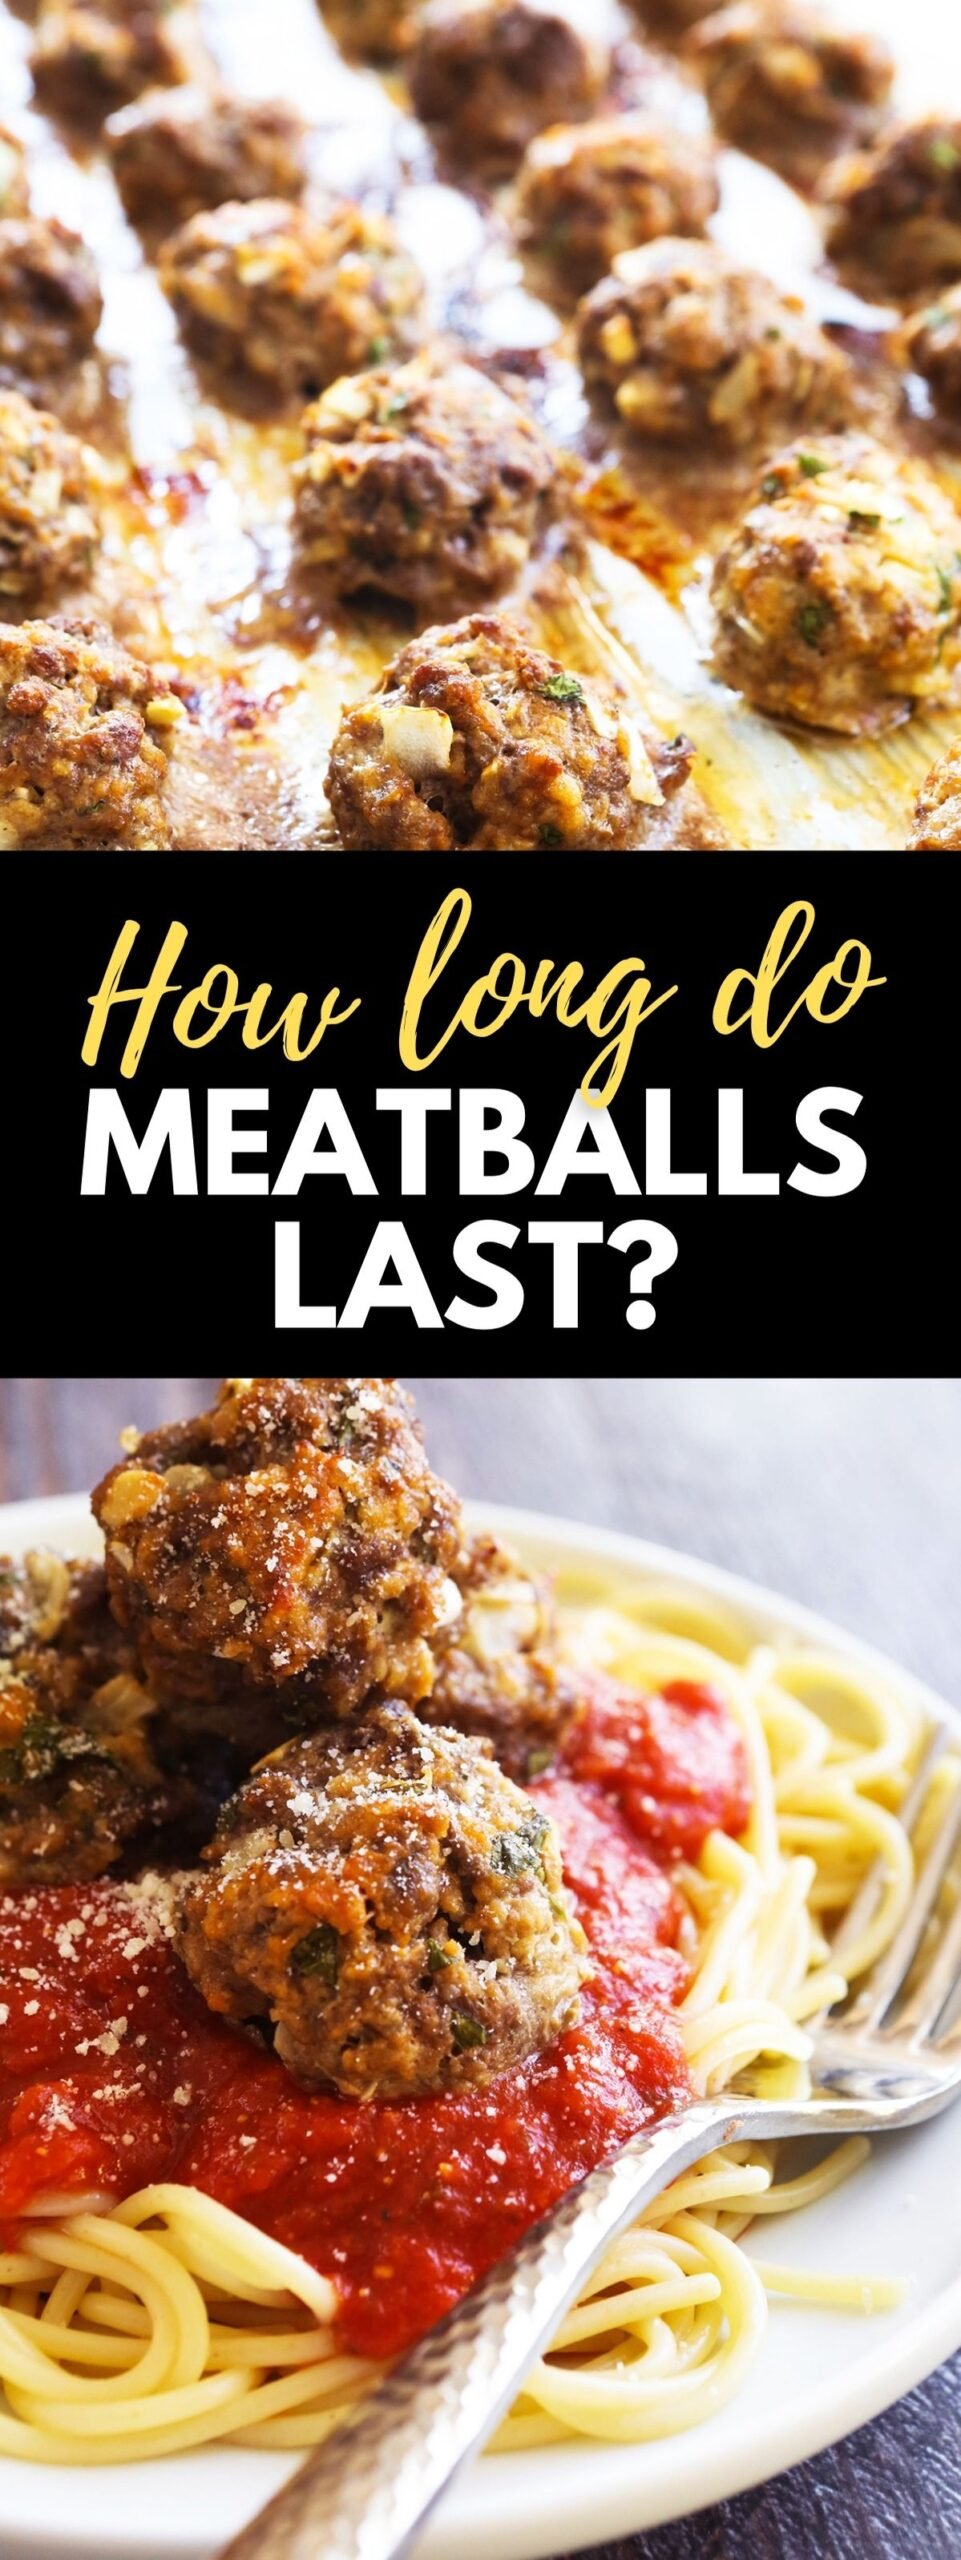 Two photos of baked meatballs with text in the middle reading: How long do meatballs last?